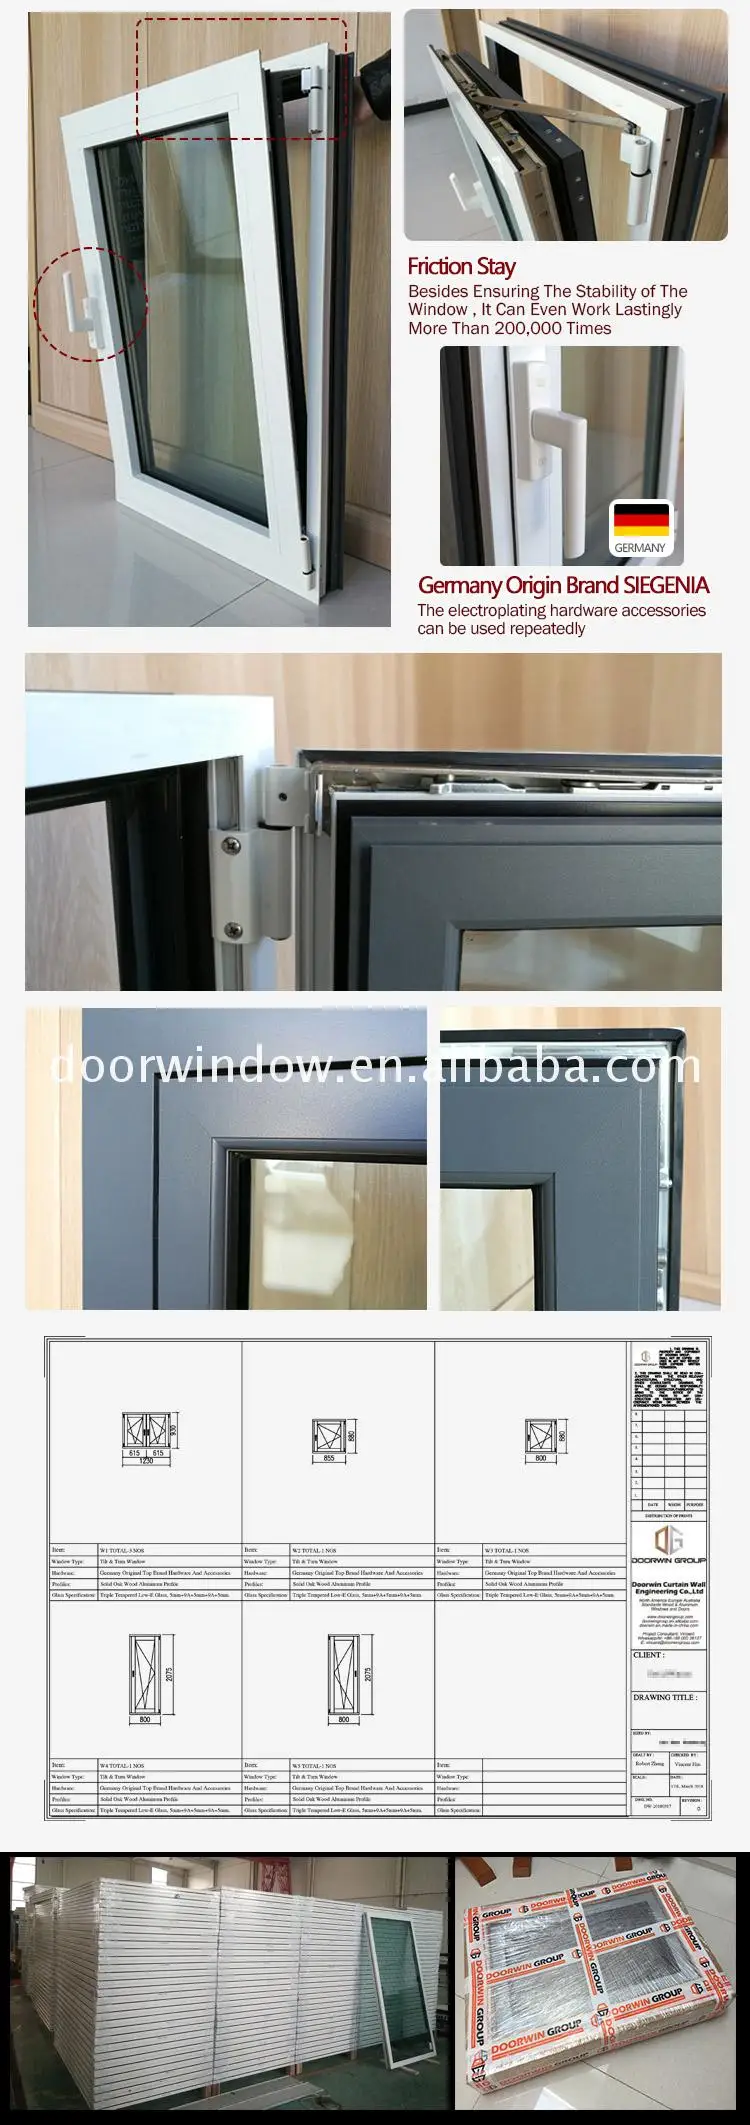 Hot new products casement window and Door made by factory swing open windows outswing with thermal break profile